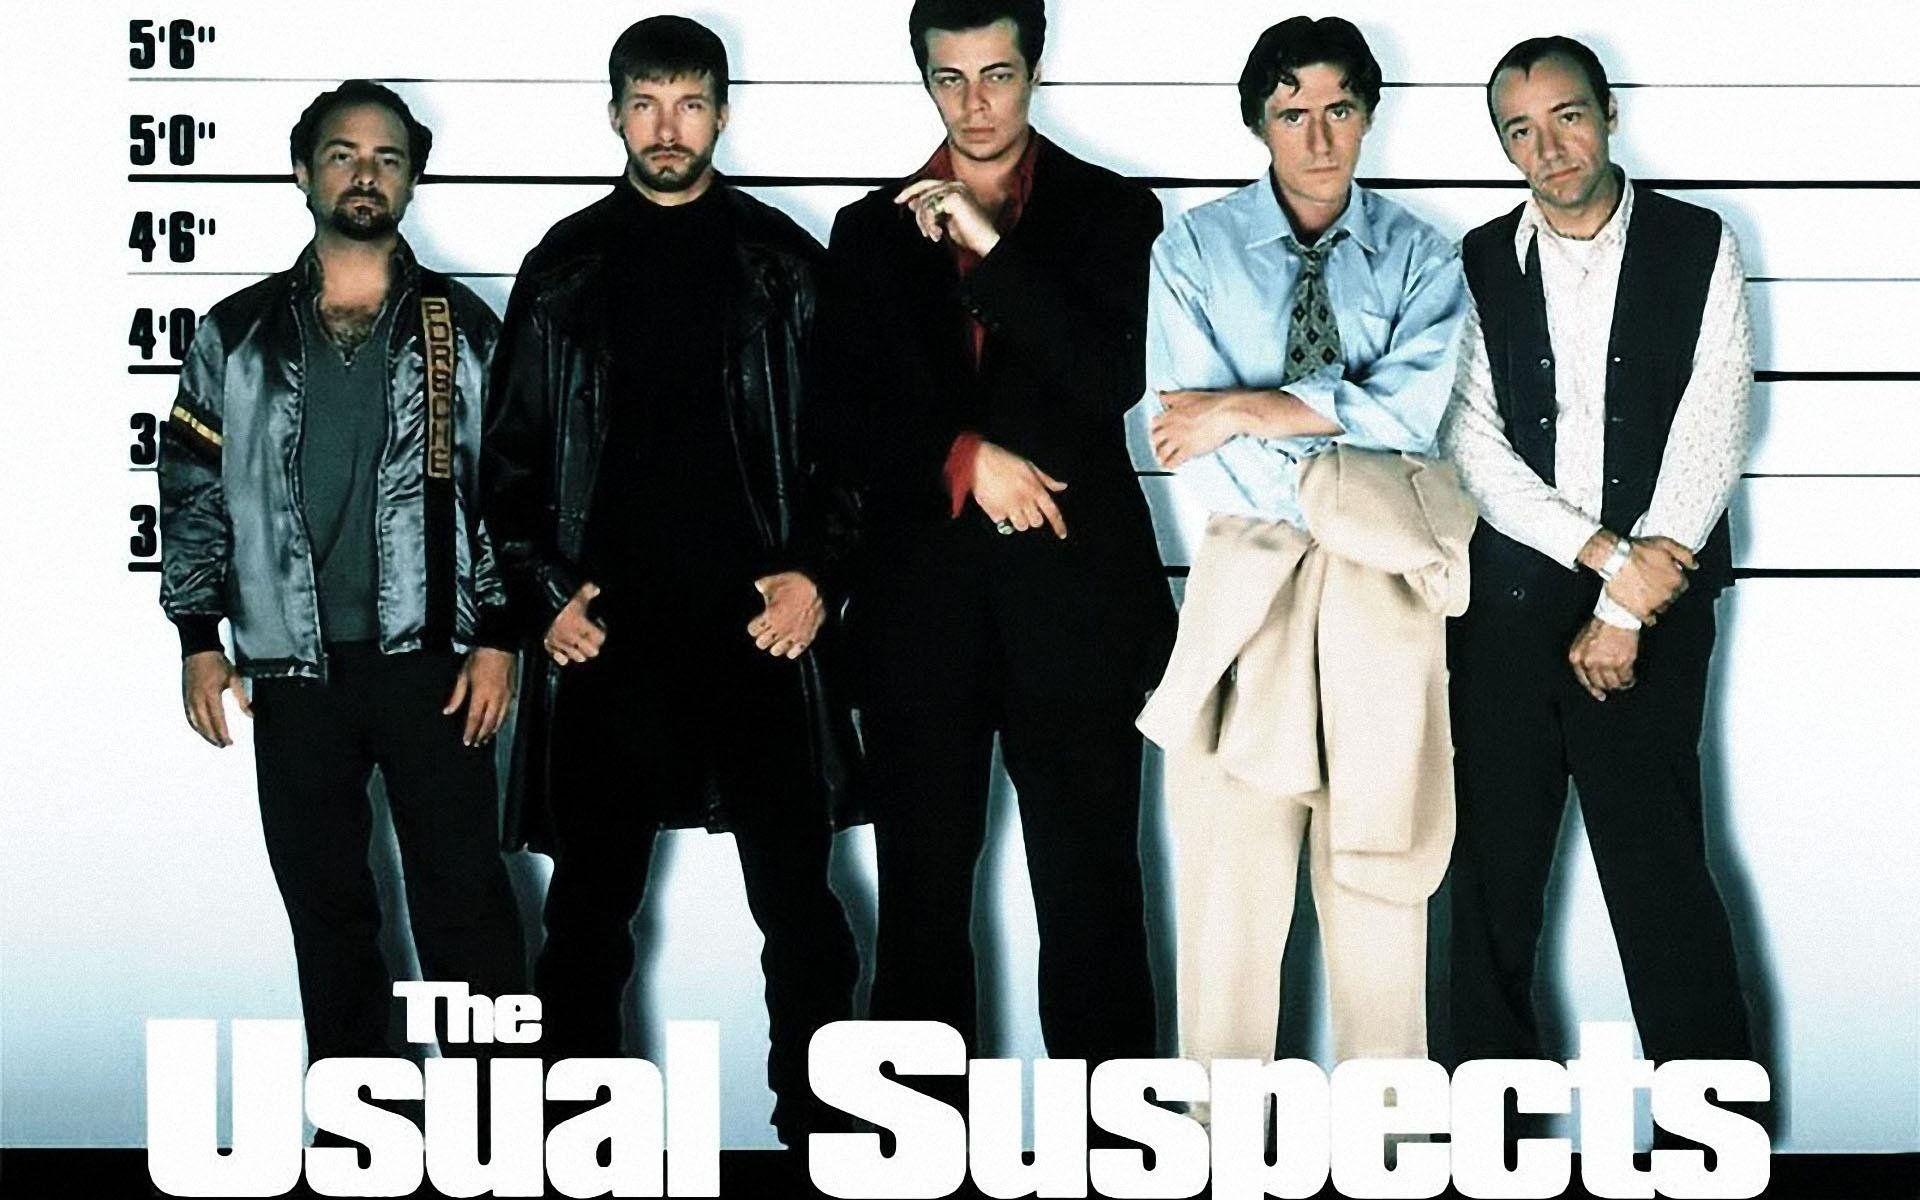 THE USUAL SUSPECTS Crime Drama Thriller Mystery Usual Suspects